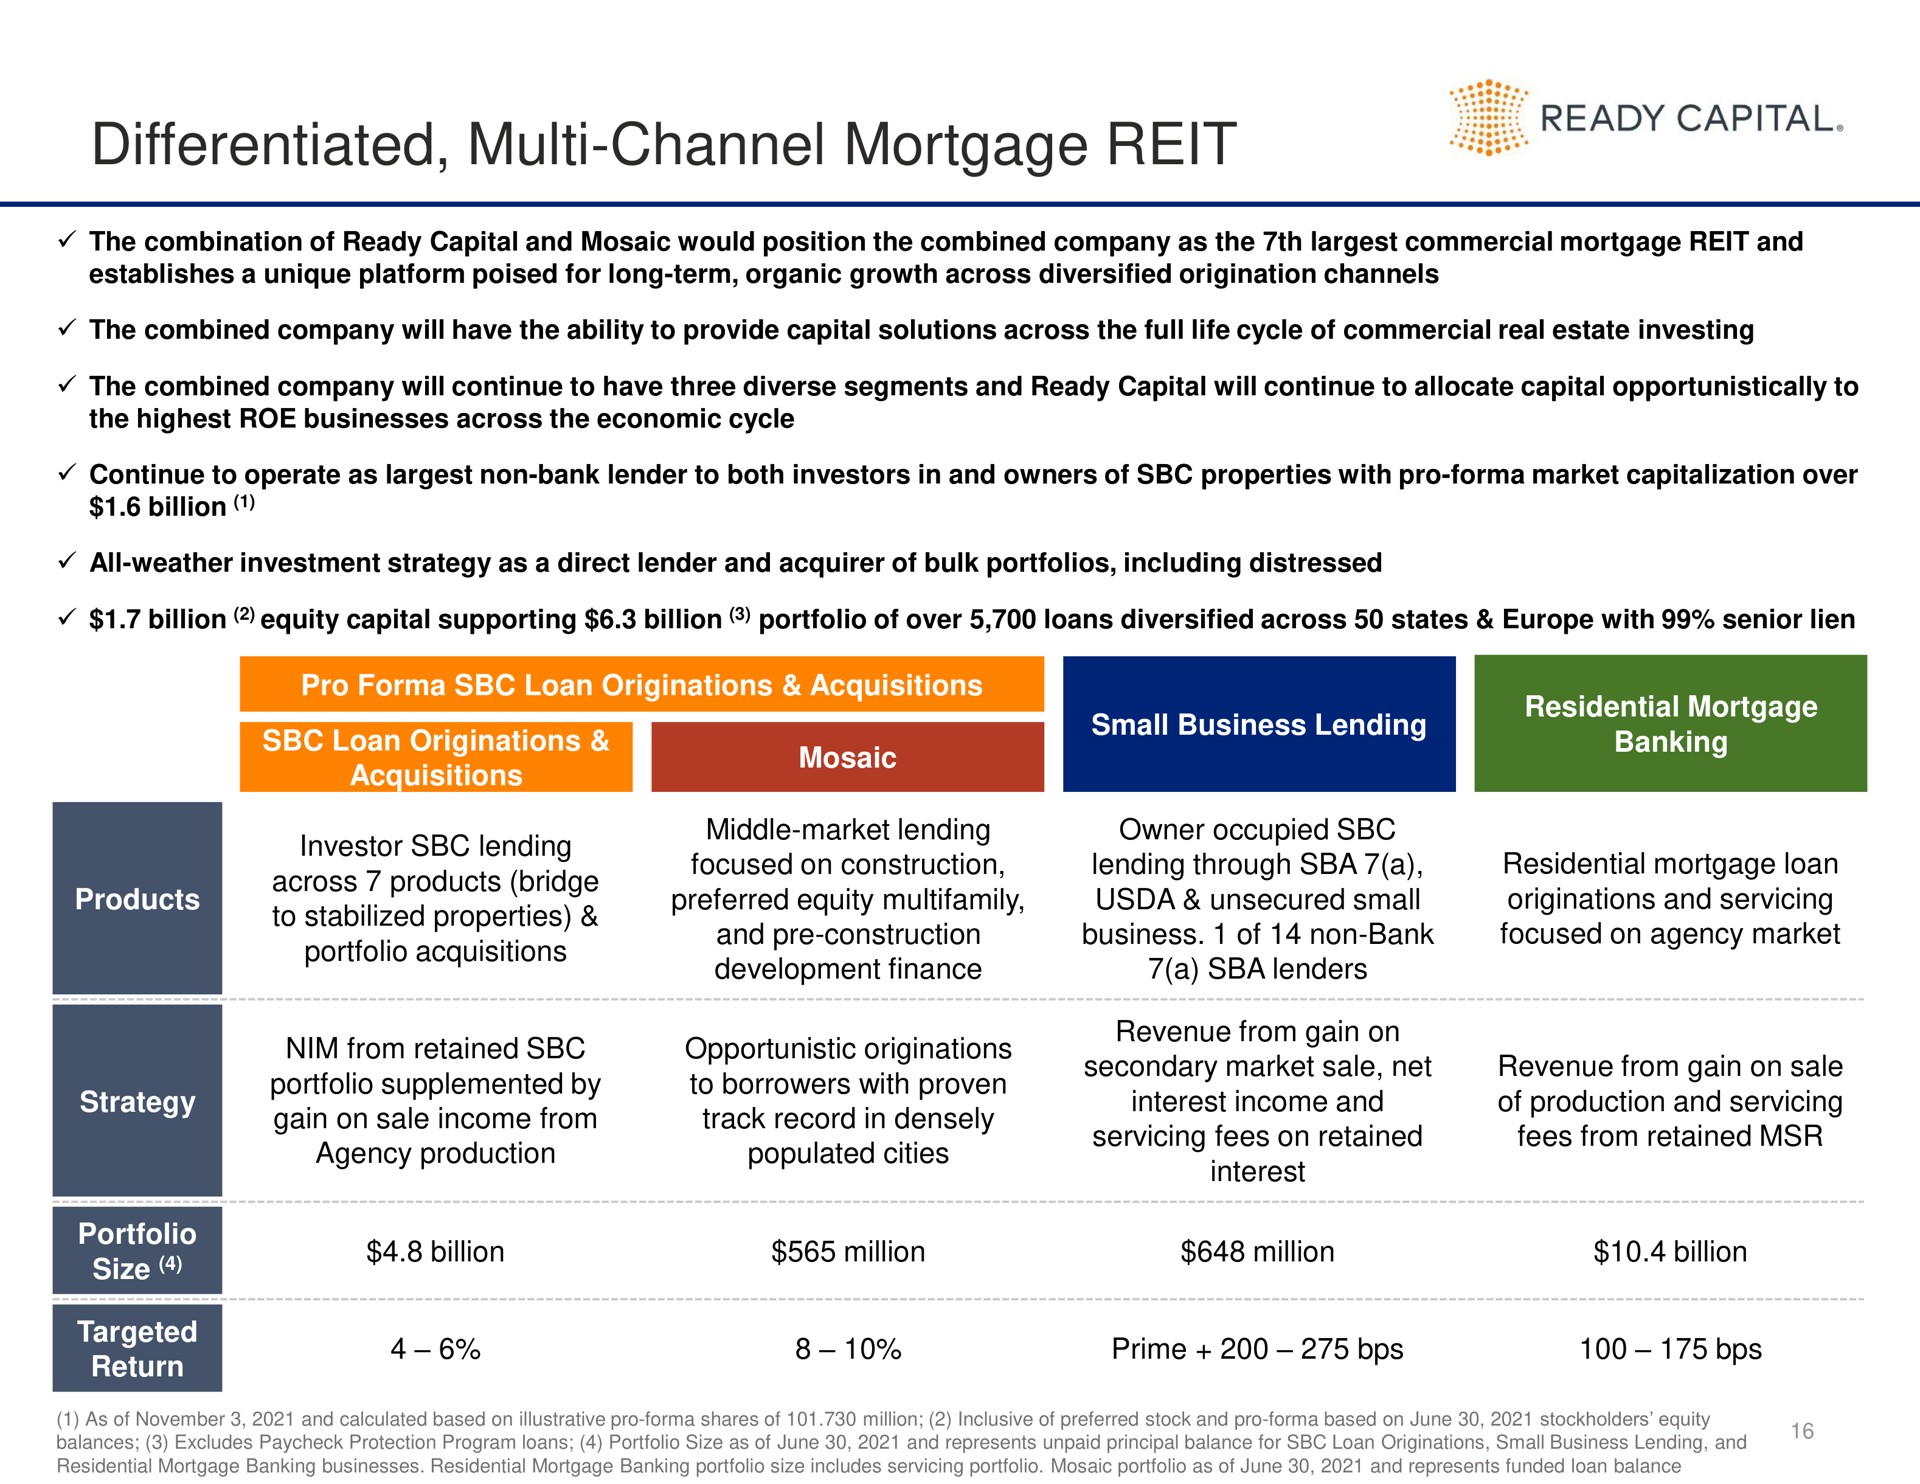 differentiated channel mortgage reit ready capital | Ready Capital